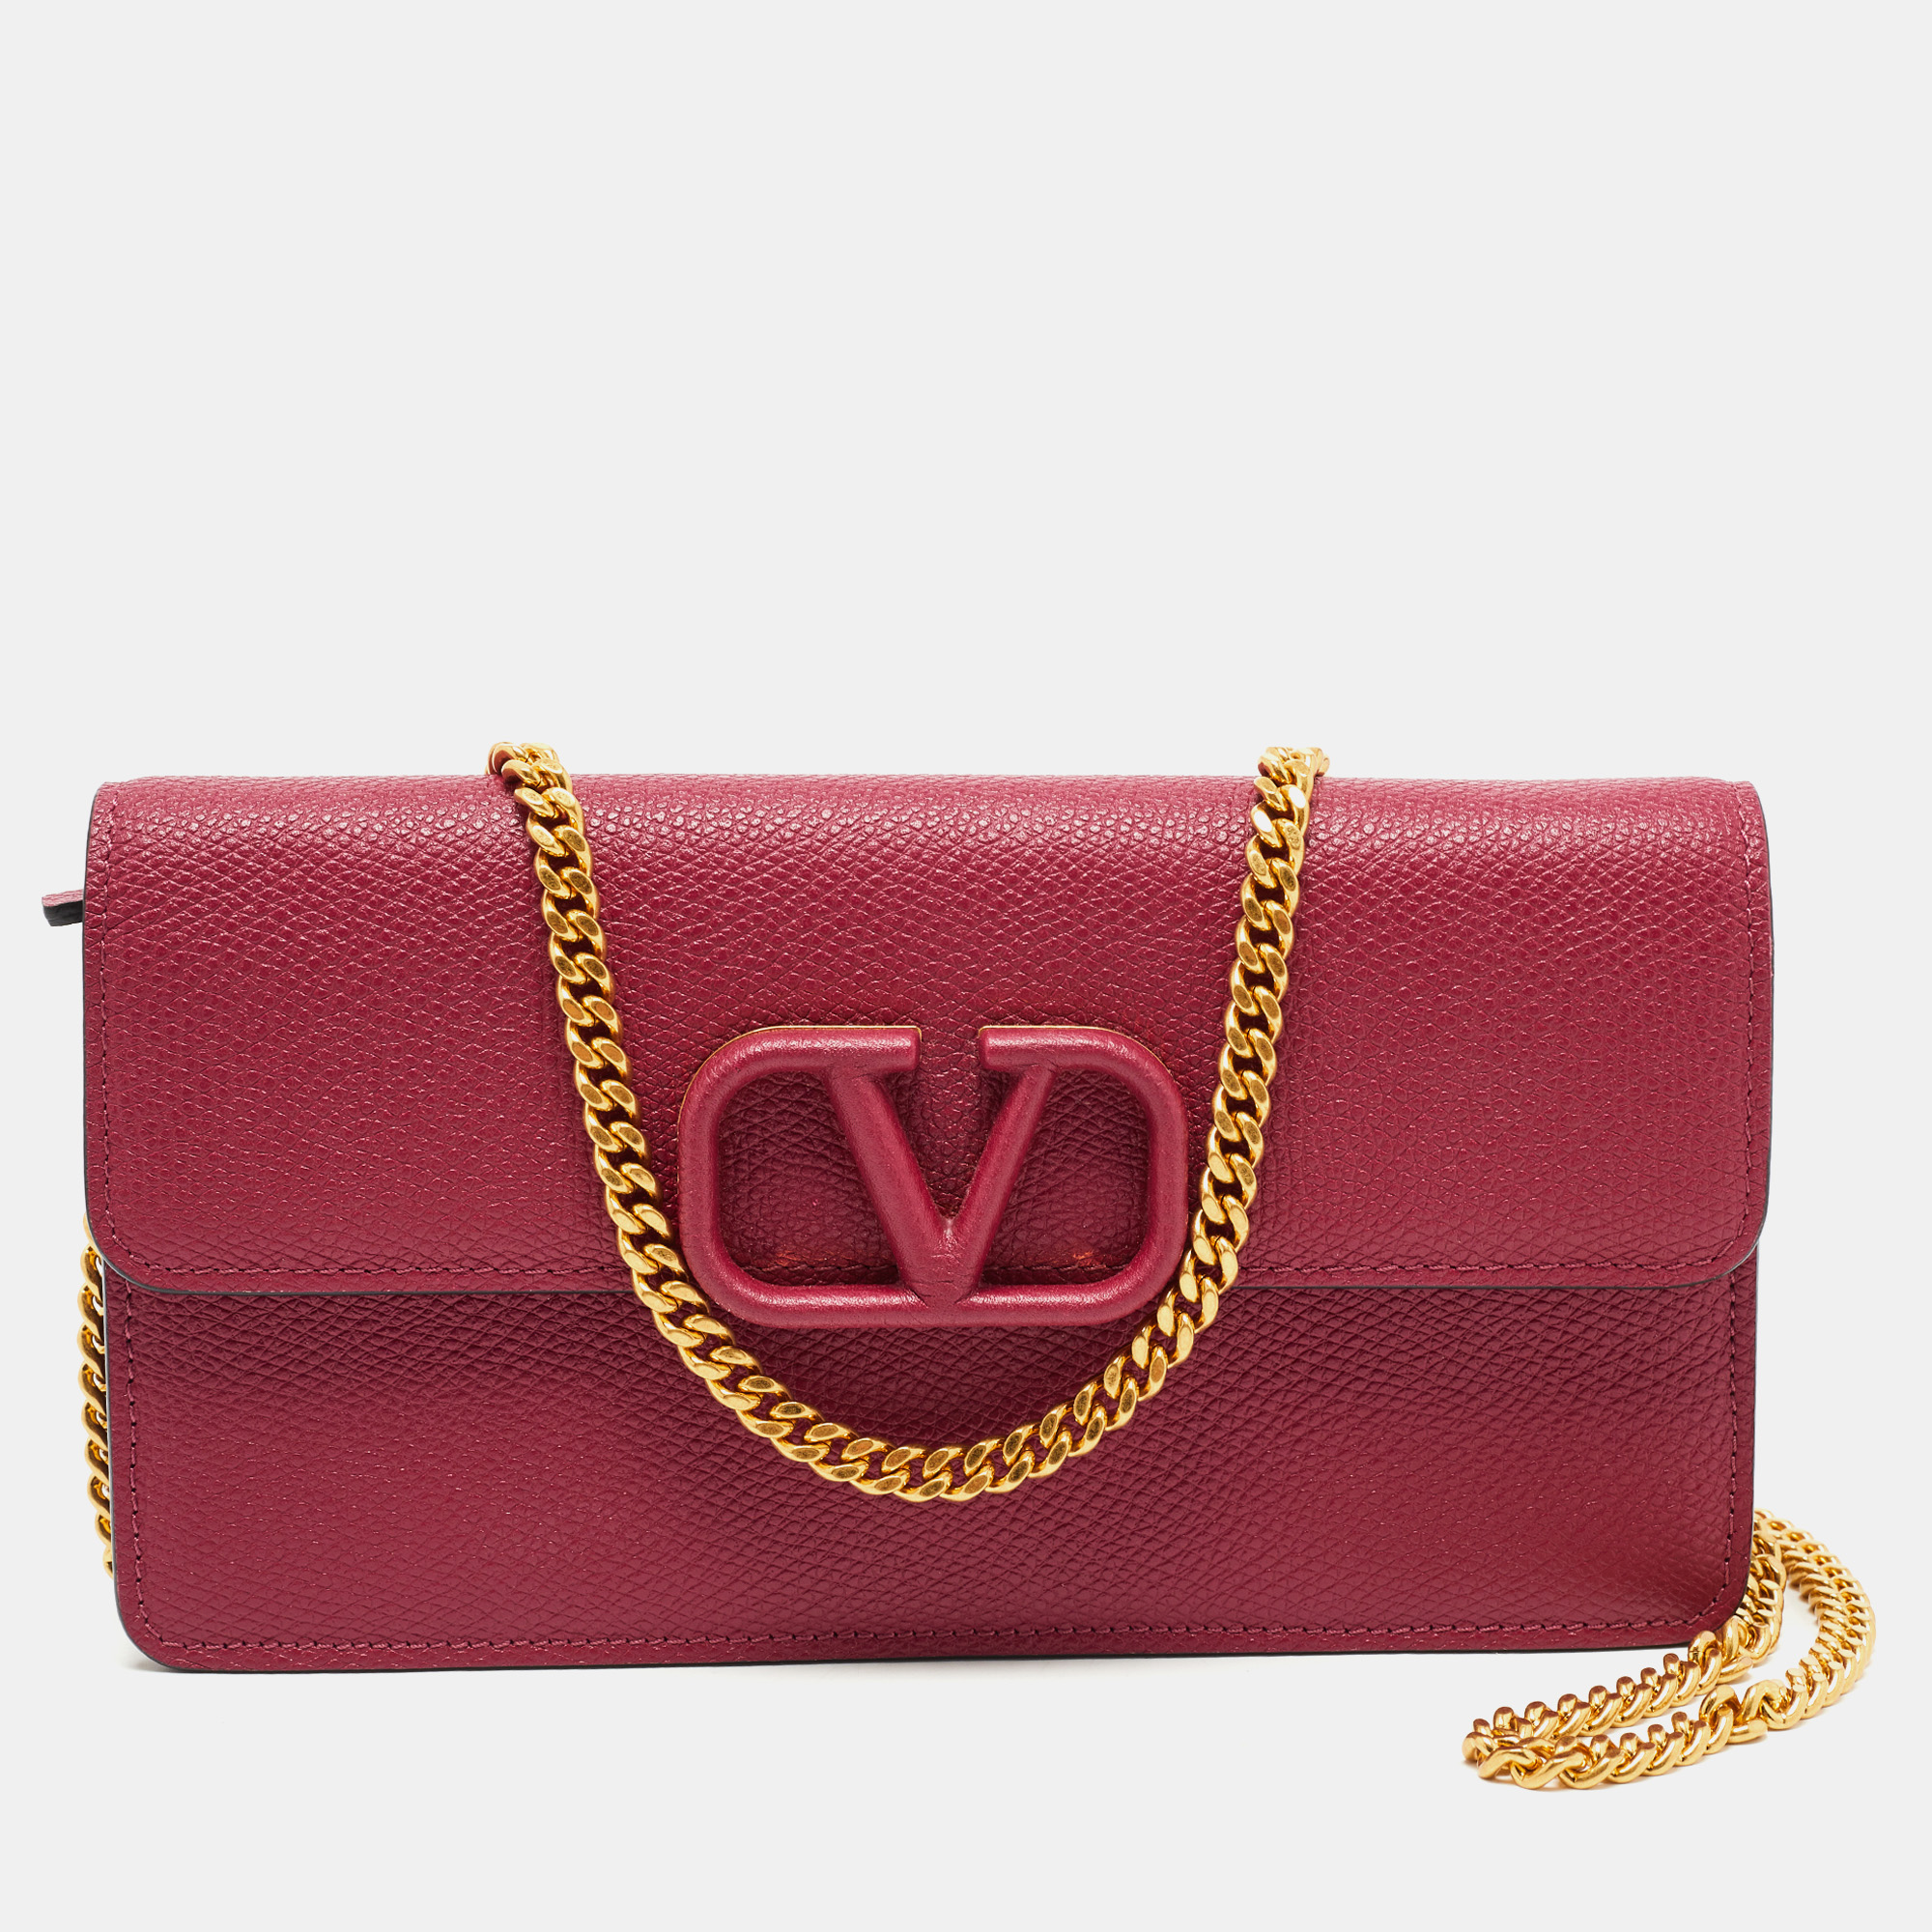 Pre-owned Valentino Garavani Red Leather Vlogo Chain Wallet